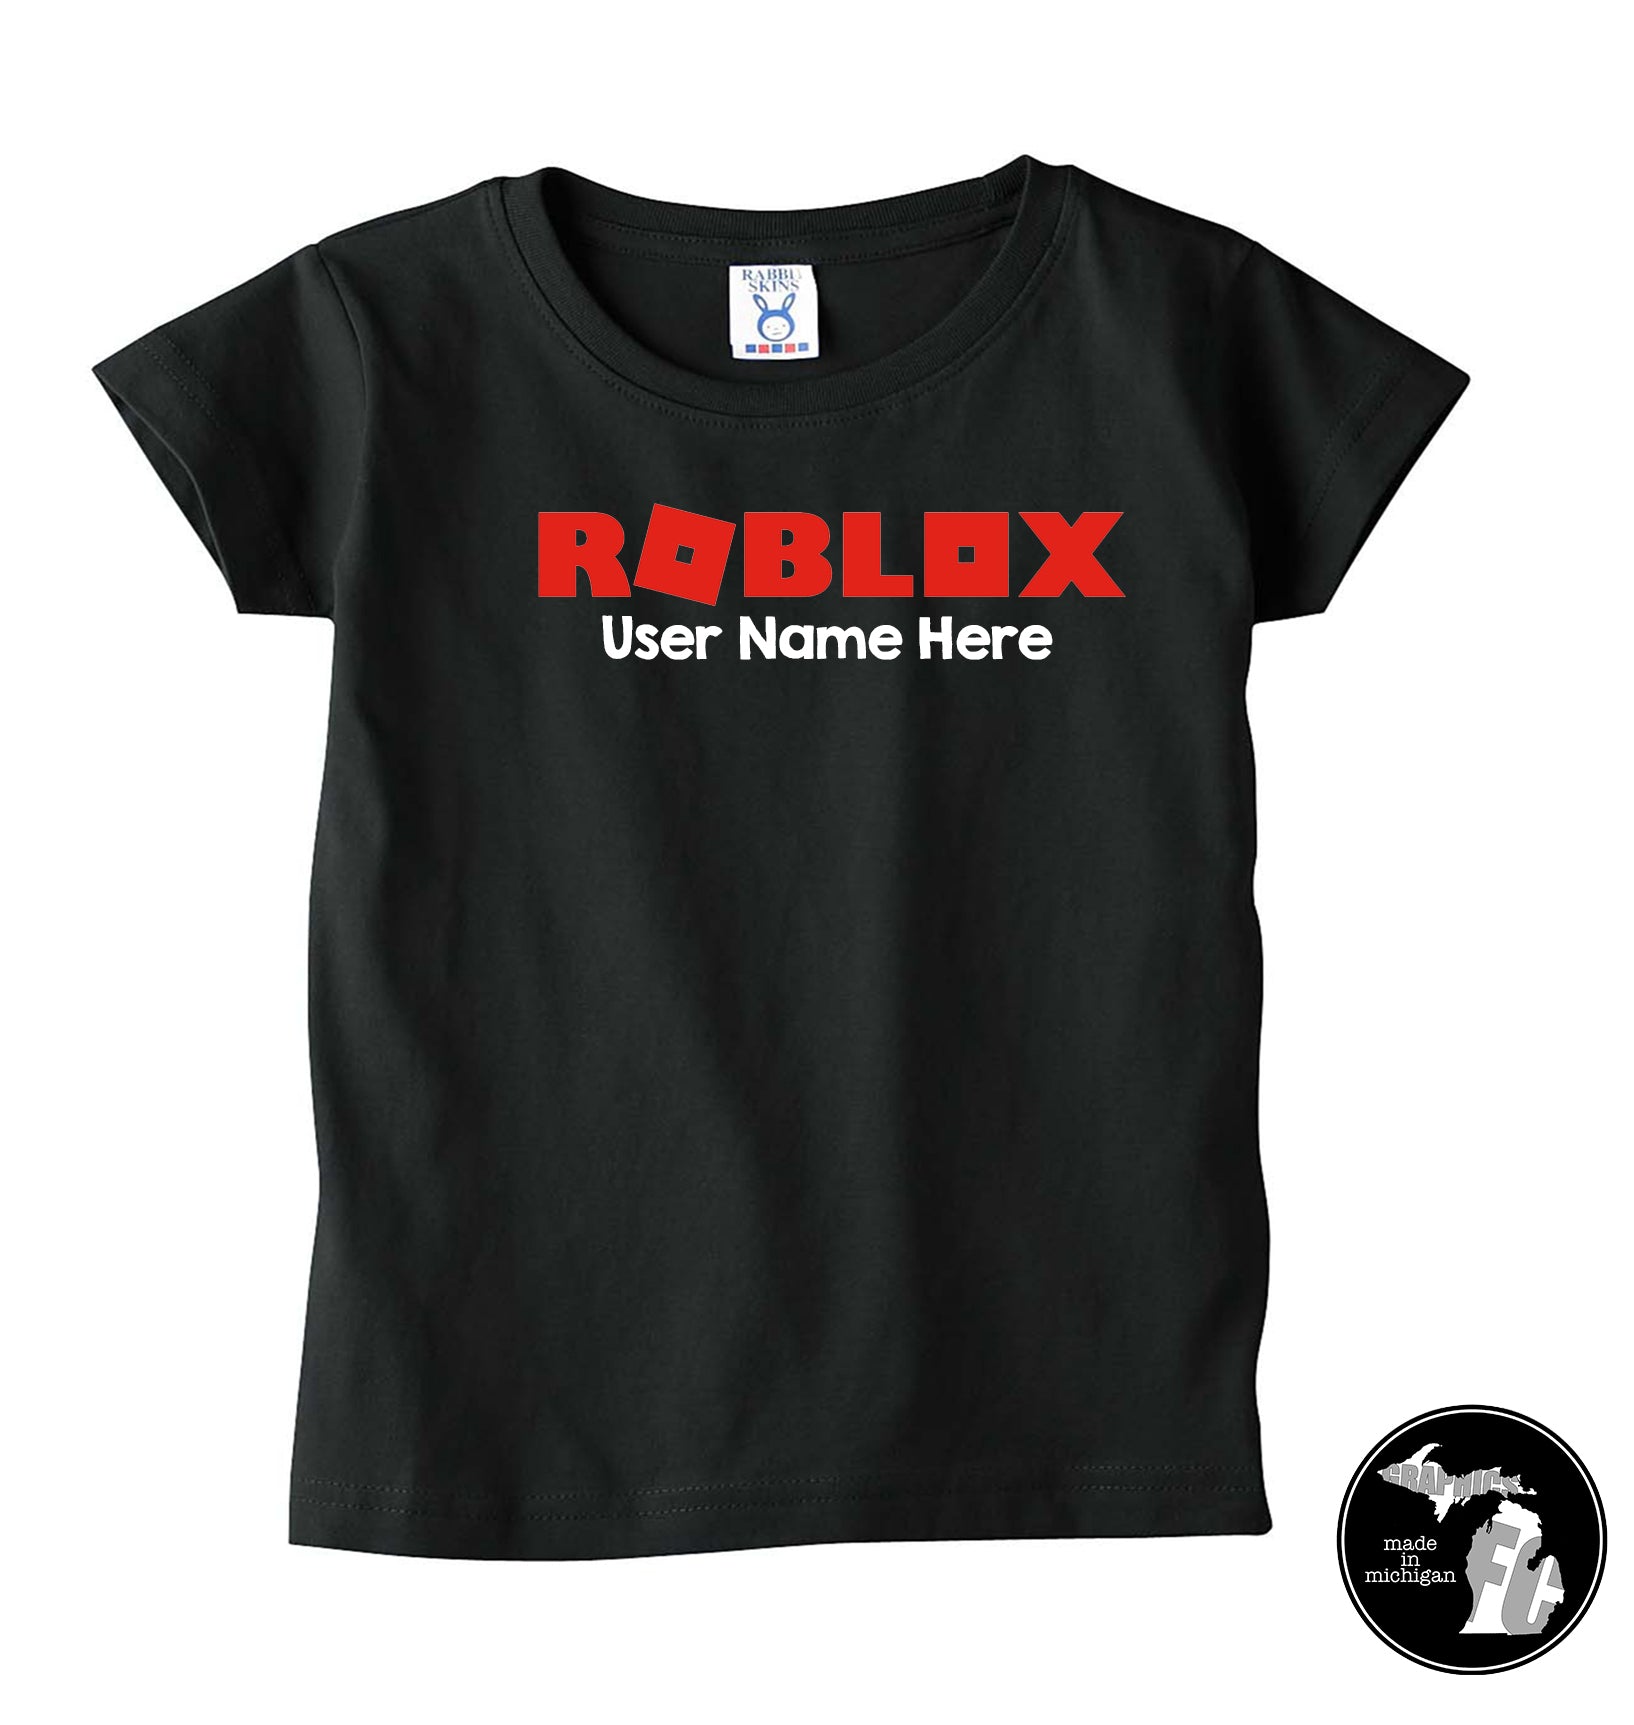 Roblox T Shirt With Personal User Name Kids Shirt Child Adults Furniture City Graphics - roblox windows t shirt free